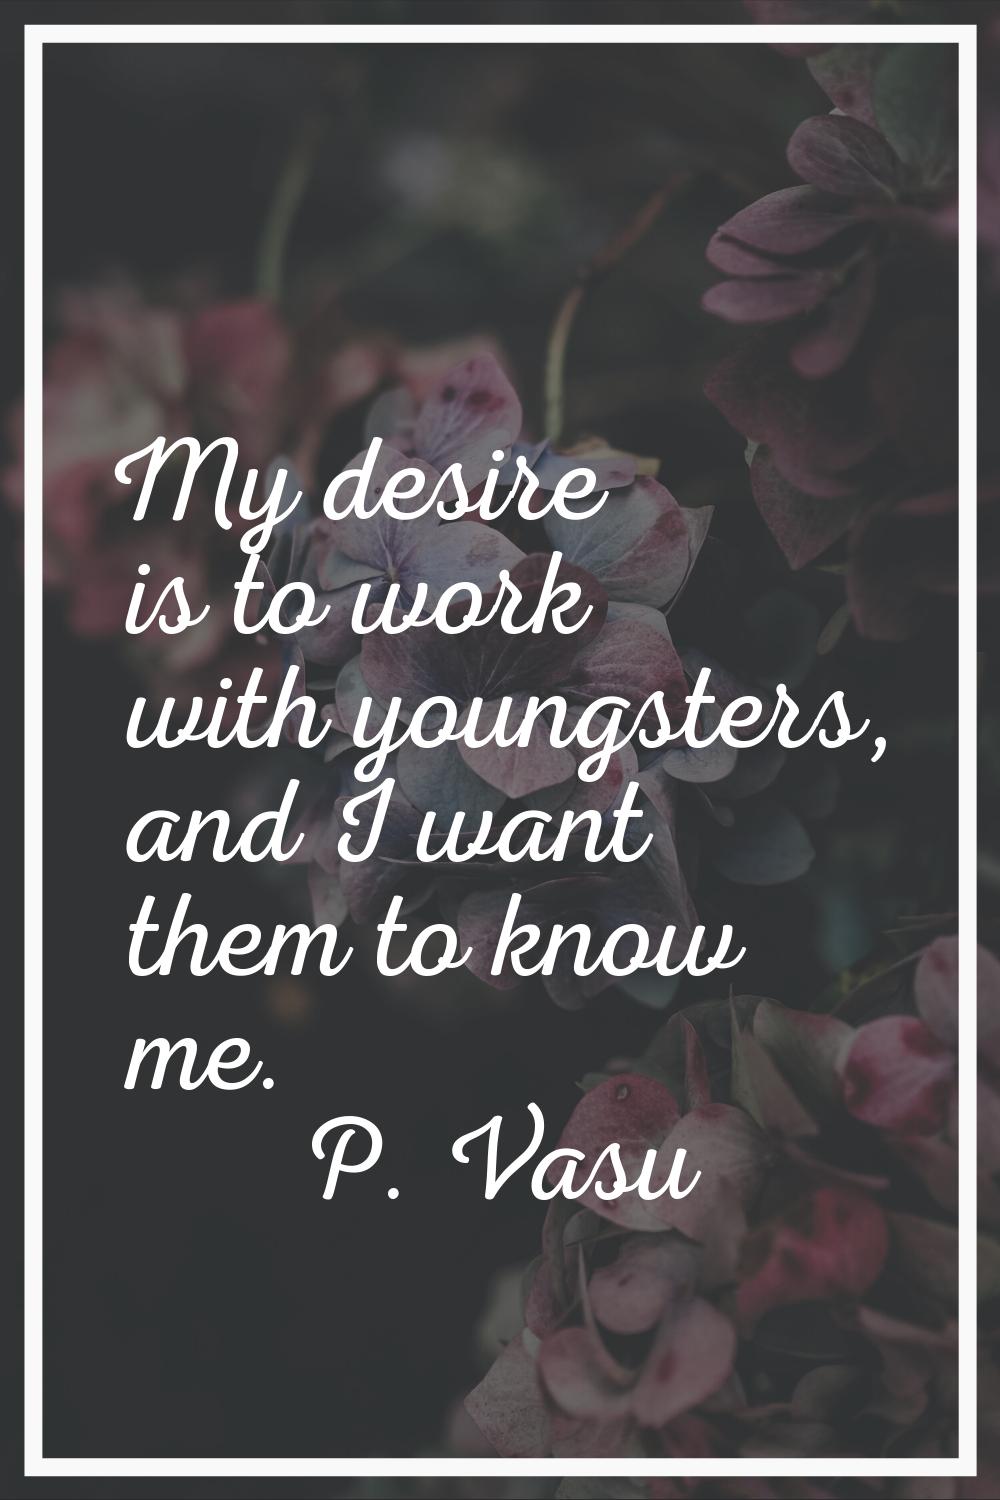 My desire is to work with youngsters, and I want them to know me.